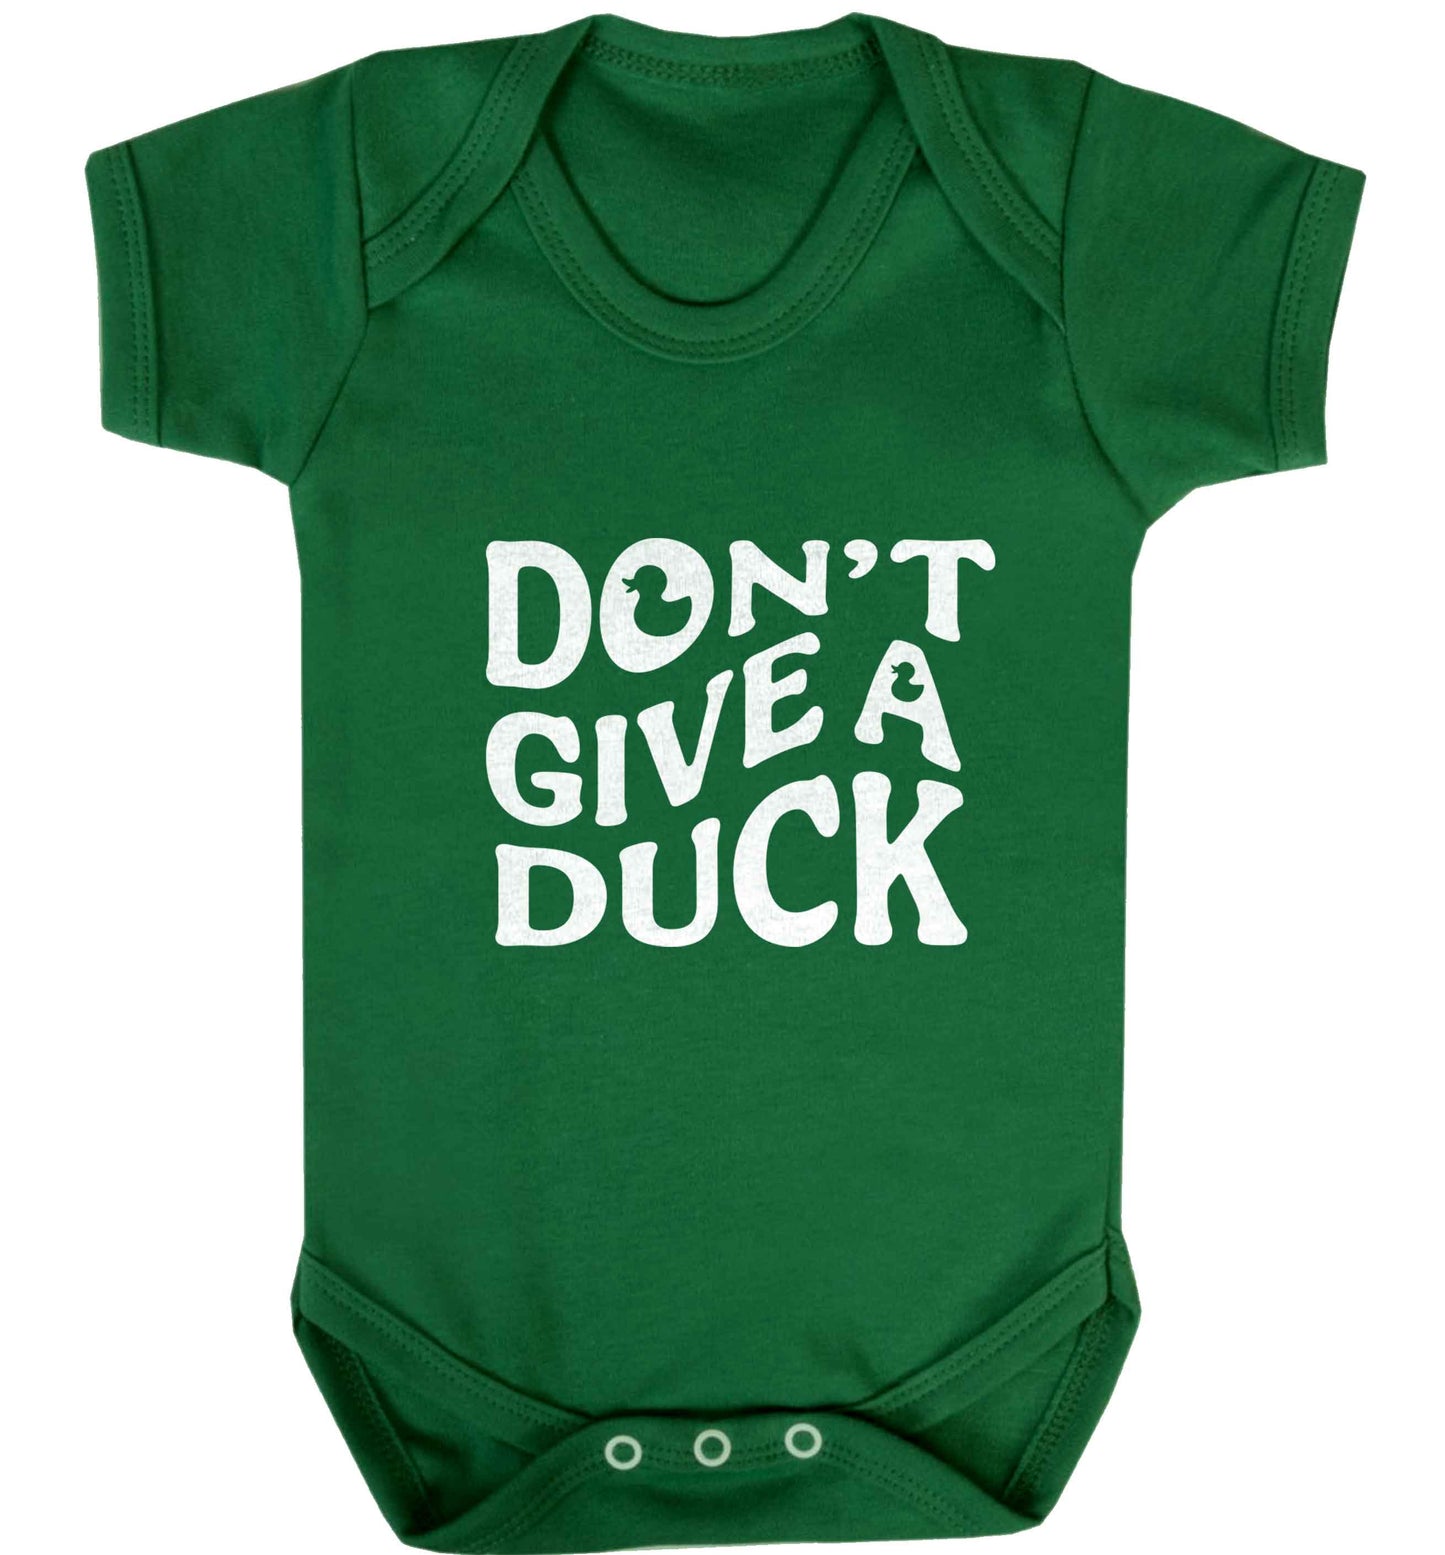 Don't give a duck baby vest green 18-24 months